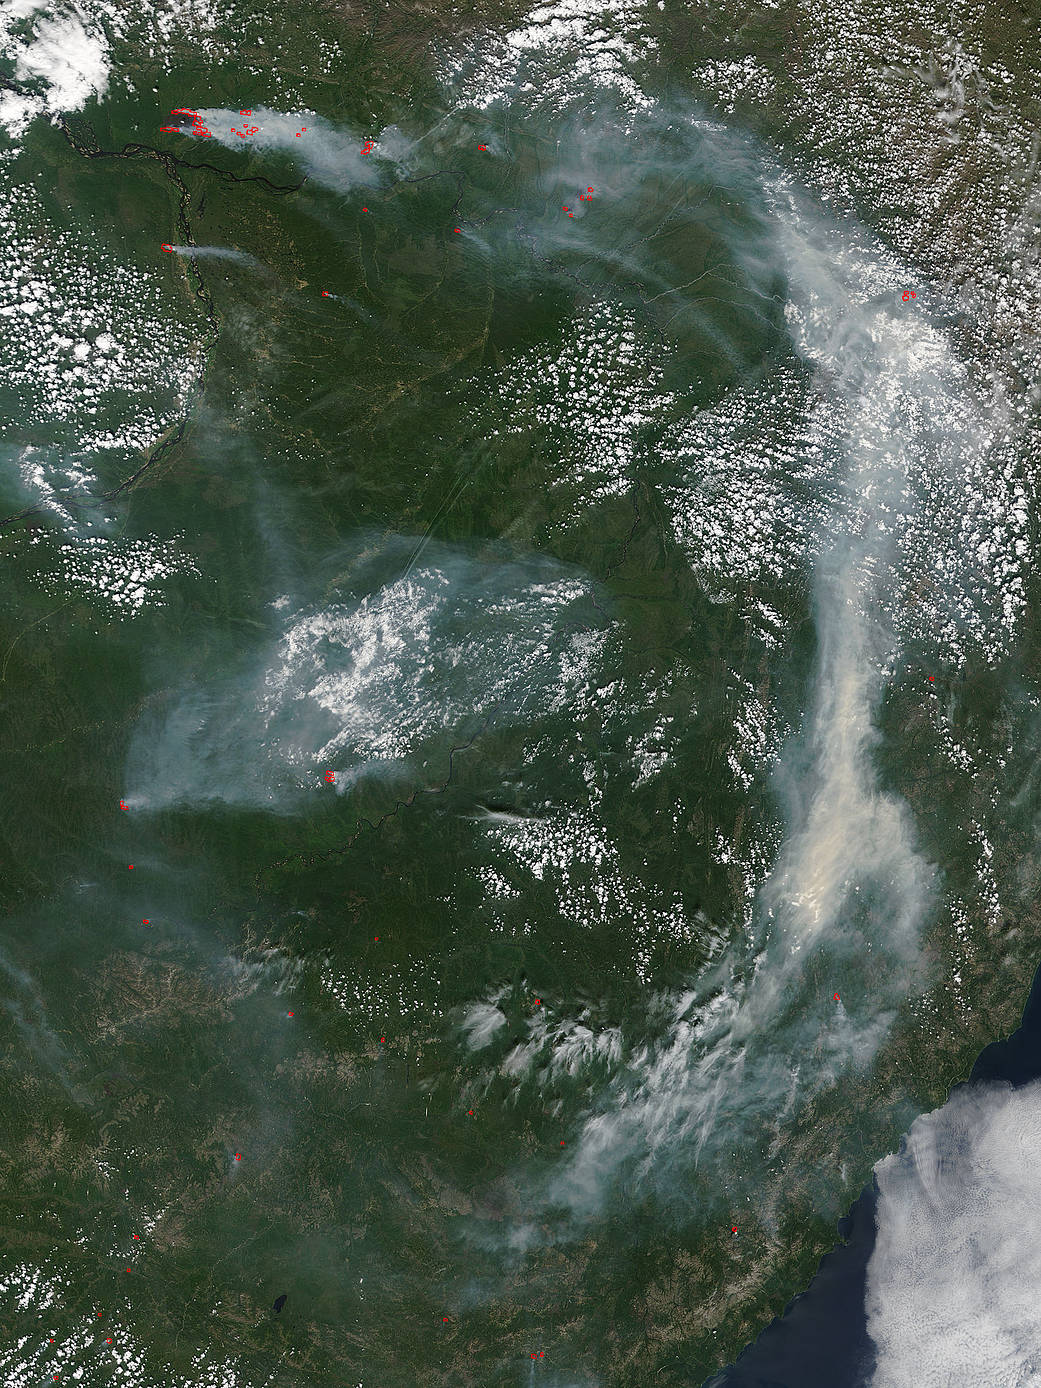 Fires in Eastern Russia